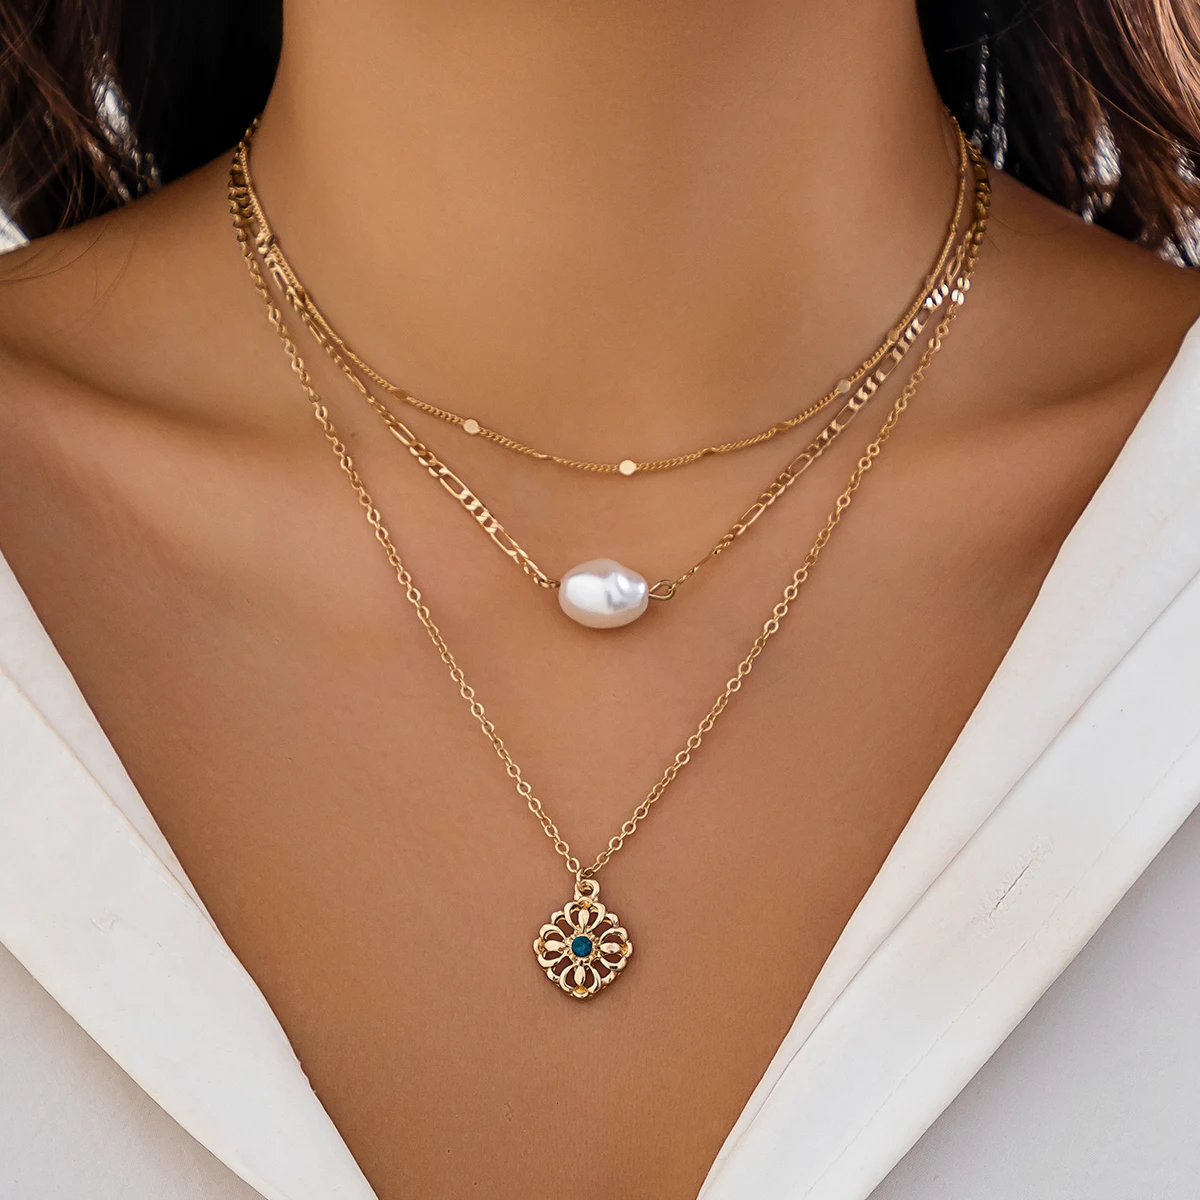 

Lacteo Vintage Multilayer Link Chain With Imitation Pearl Charm Necklace for Women Geometric Pendant Choker Jewelry Collar Gifts